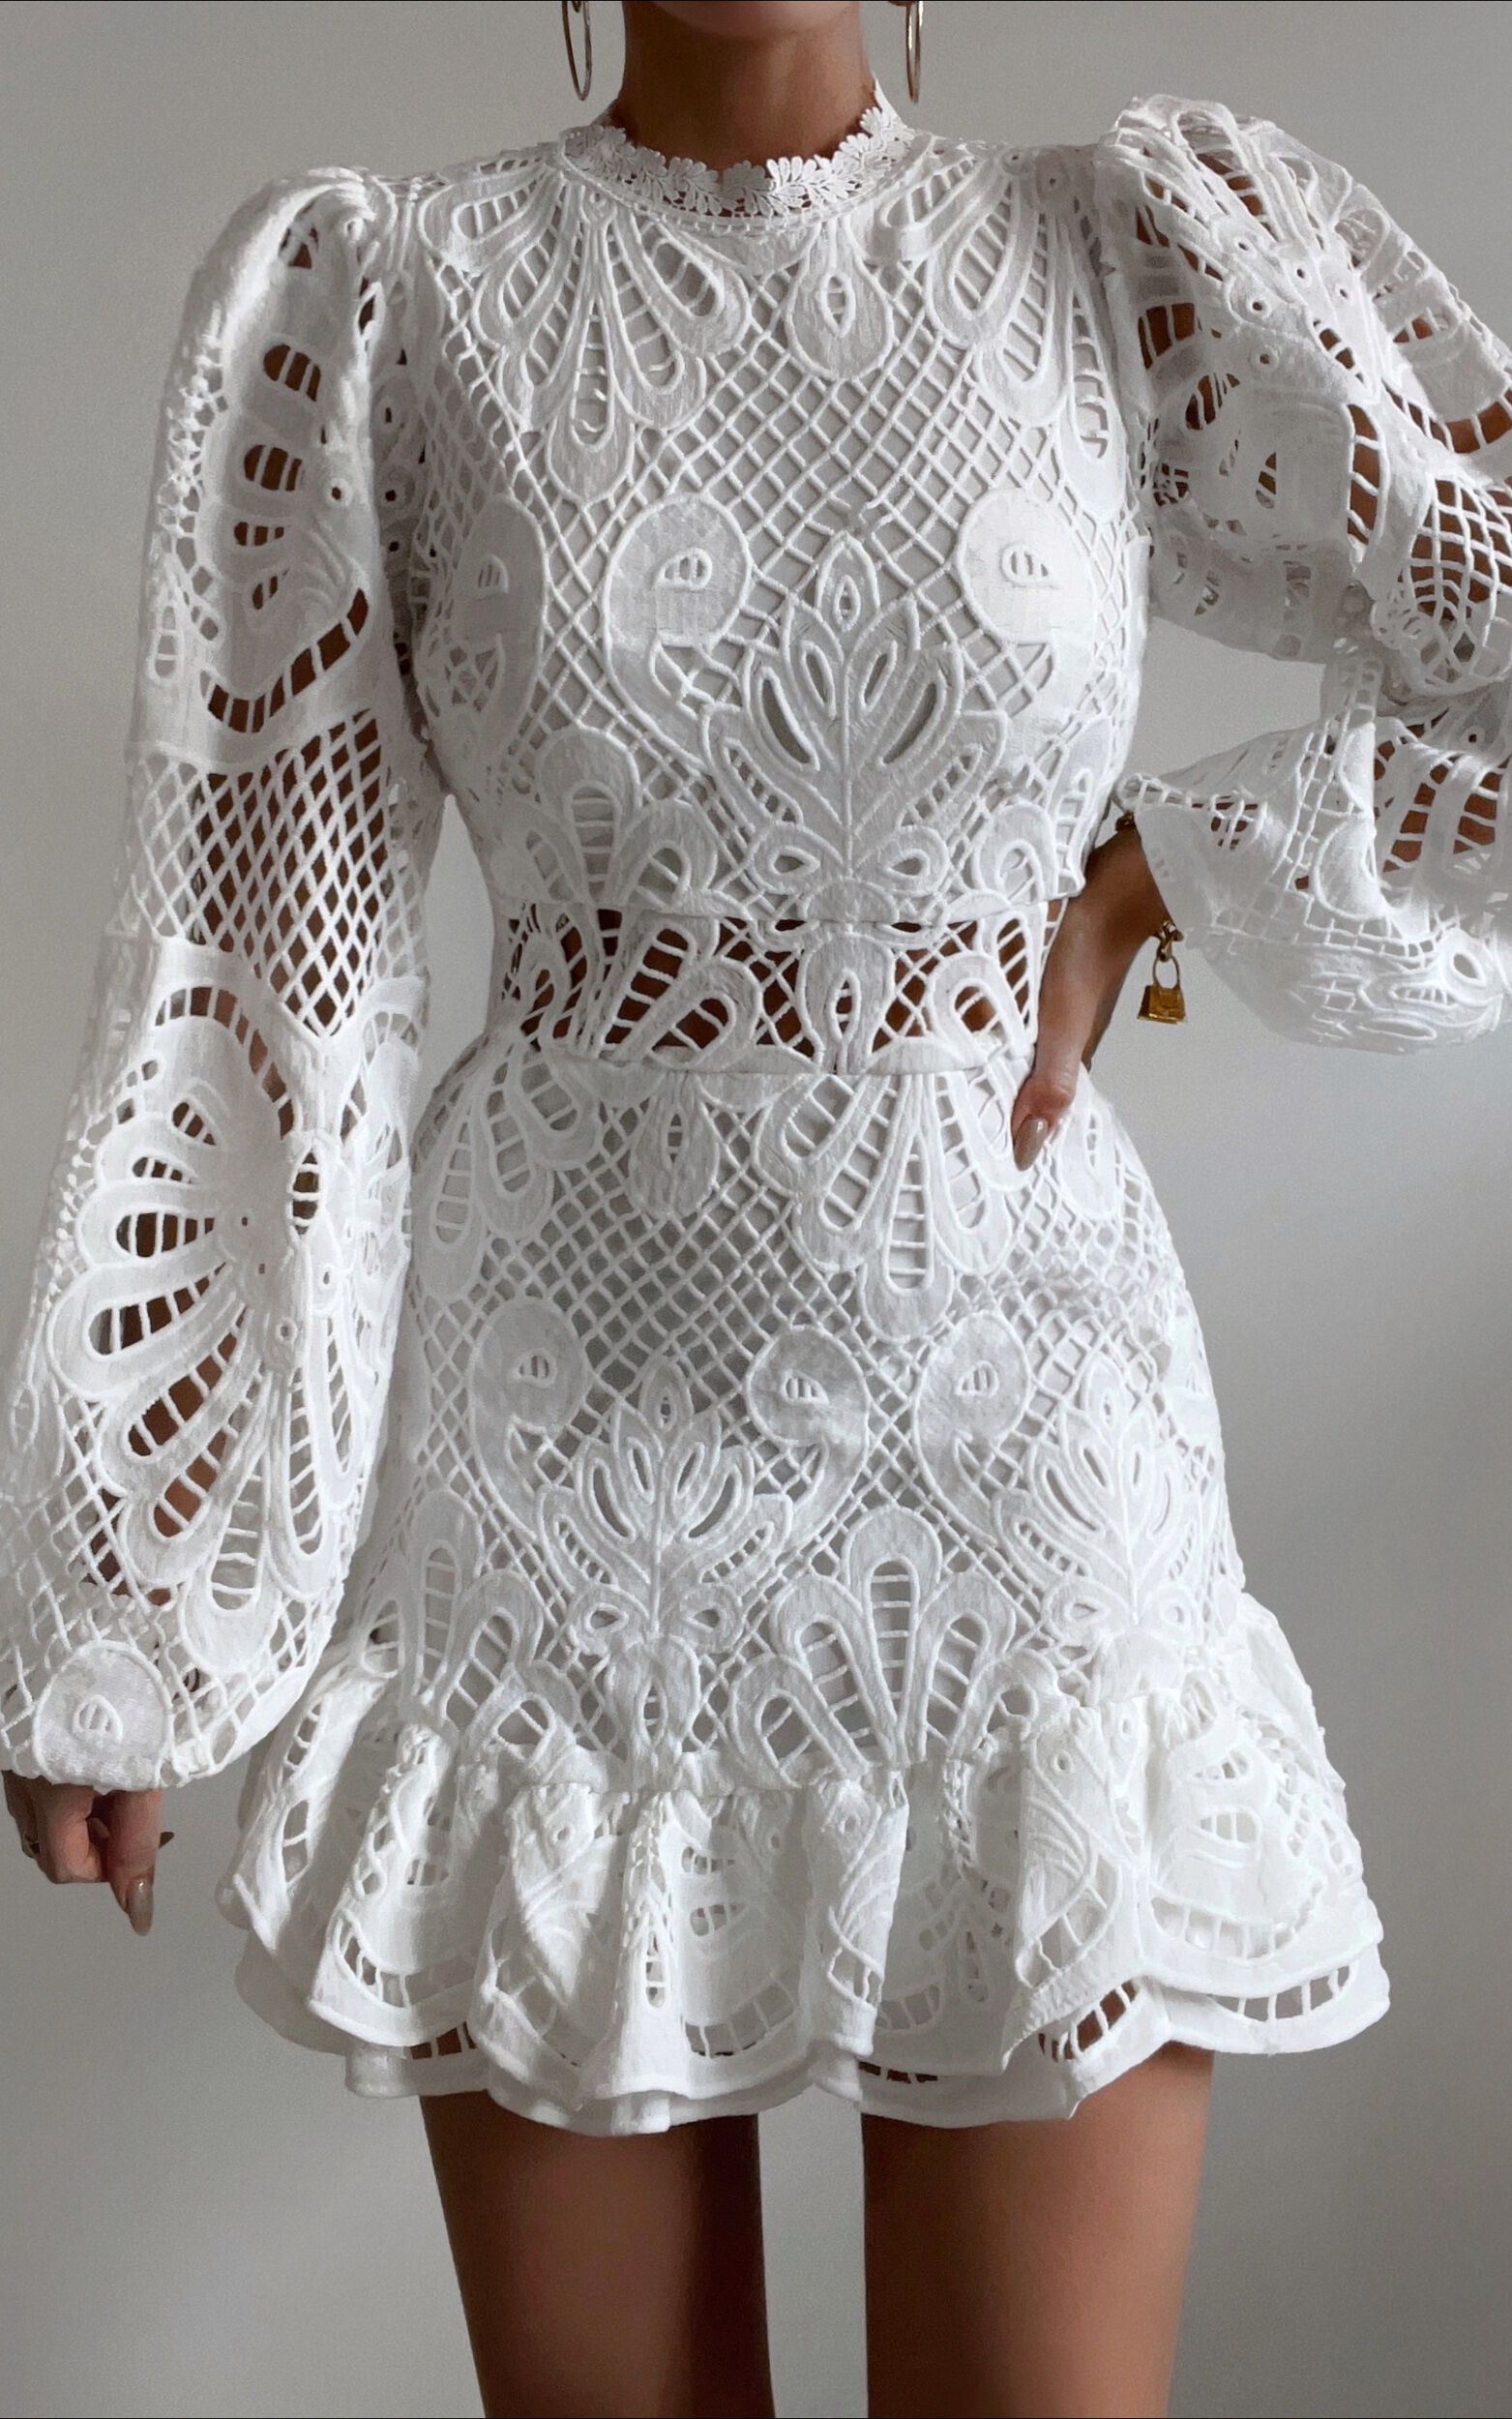 Kiss Me Now Mini Dress - Long Puff Sleeve Dress in White Lace - Showpo Fit & Flare Dresses